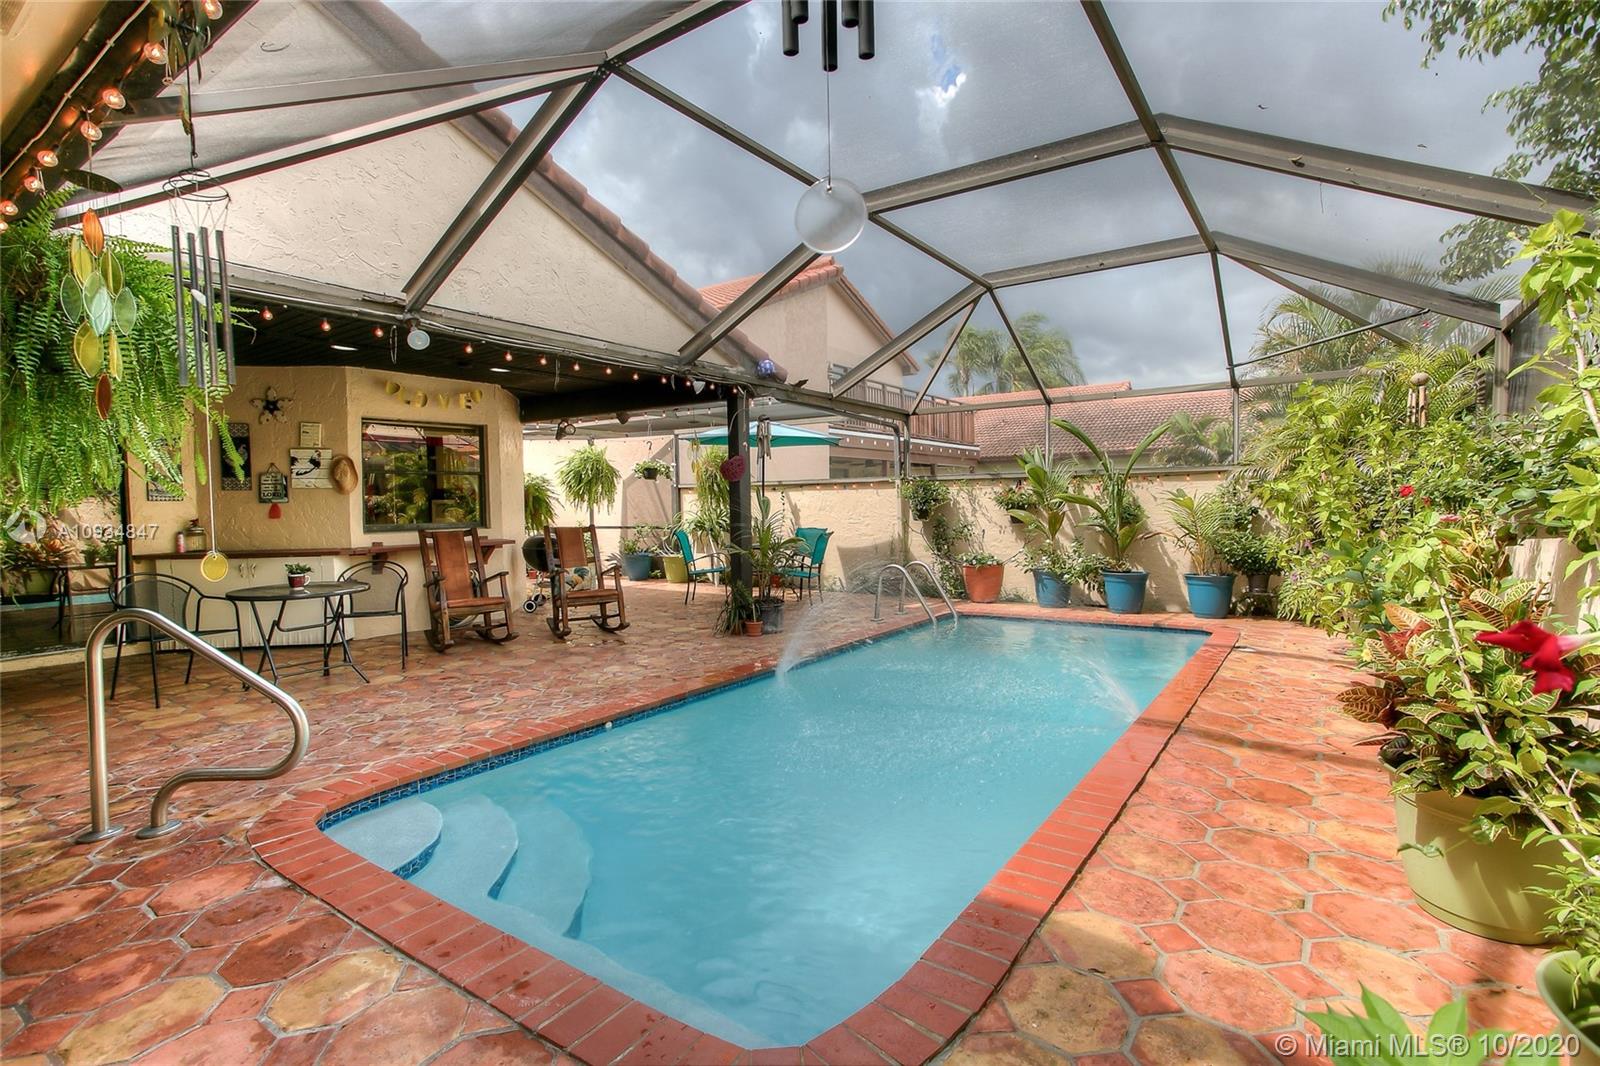 Charming Screened in Pool - Pool 6' res AVG 3-8' dpth, plain feat 250-649 sf